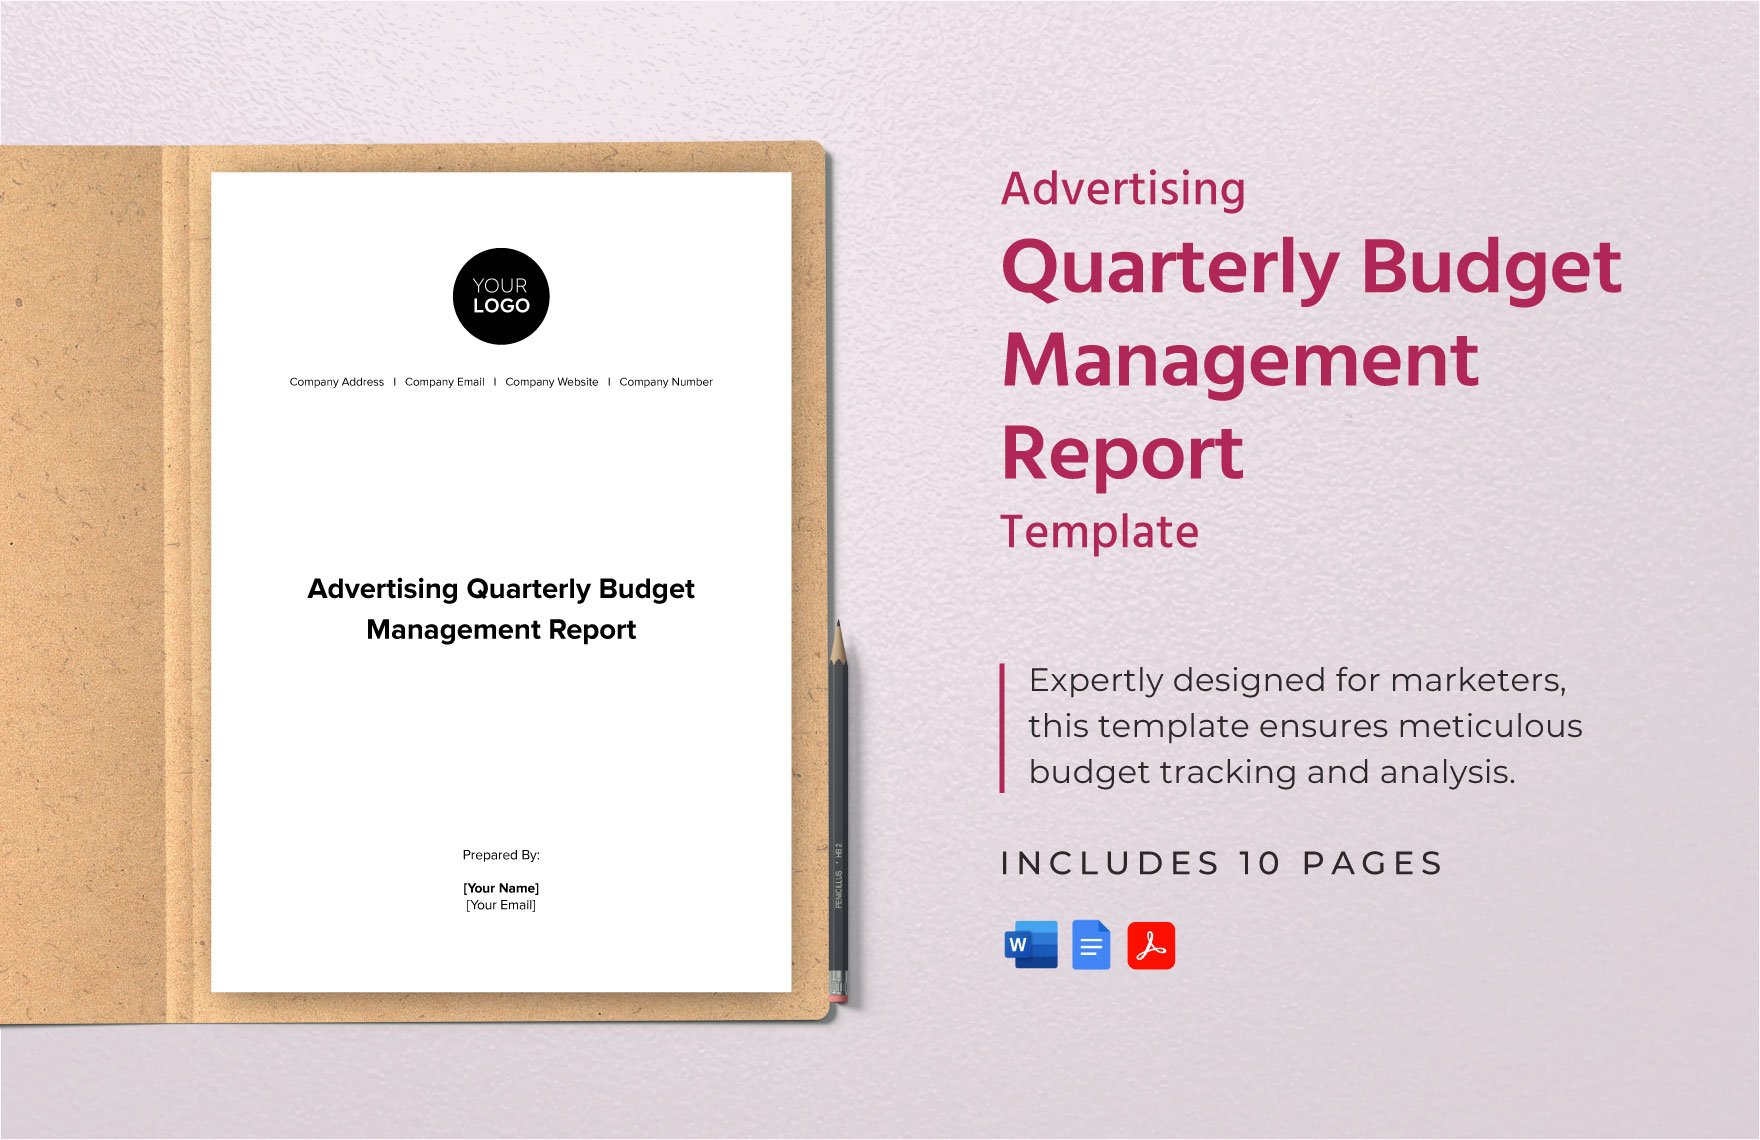 Advertising Quarterly Budget Management Report Template in Word, Google Docs, PDF